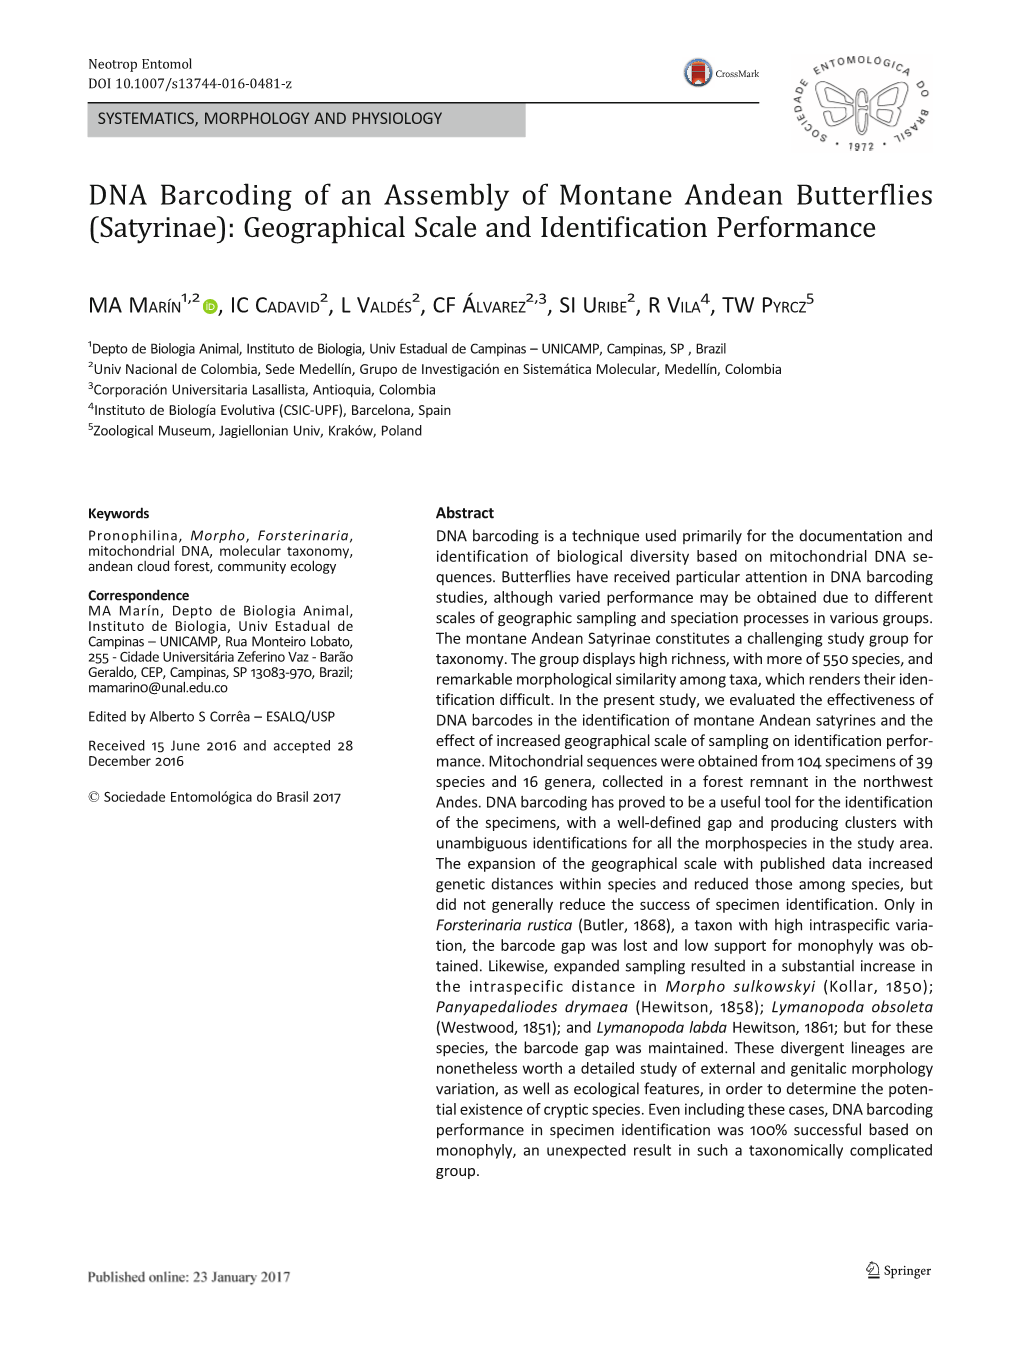 DNA Barcoding of an Assembly of Montane Andean Butterflies (Satyrinae): Geographical Scale and Identification Performance